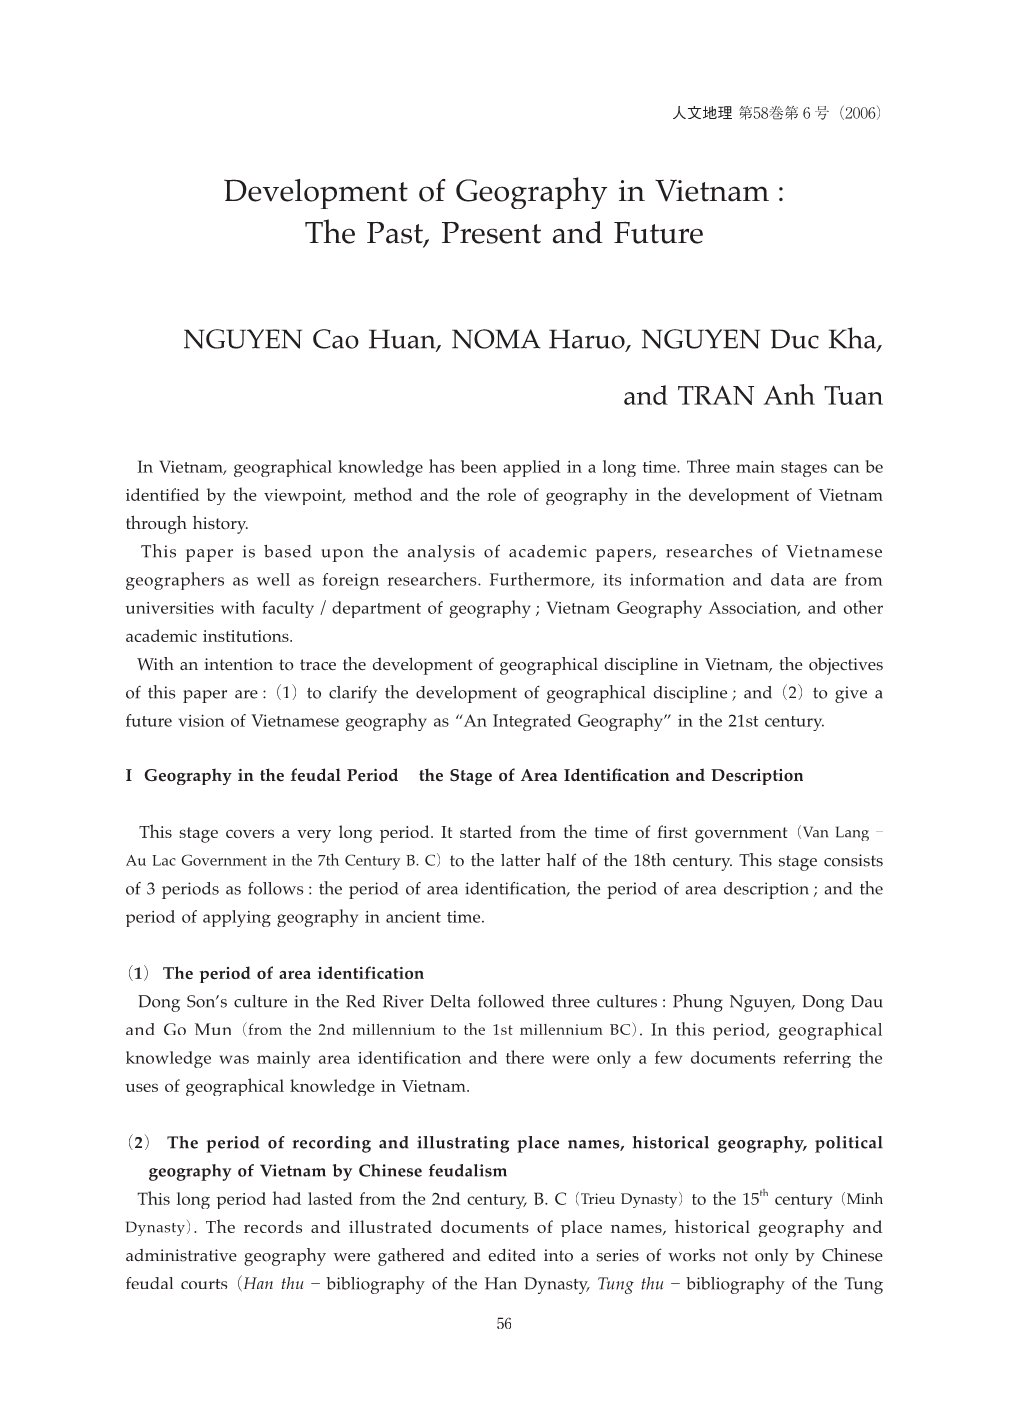 Development of Geography in Vietnam : the Past, Present and Future